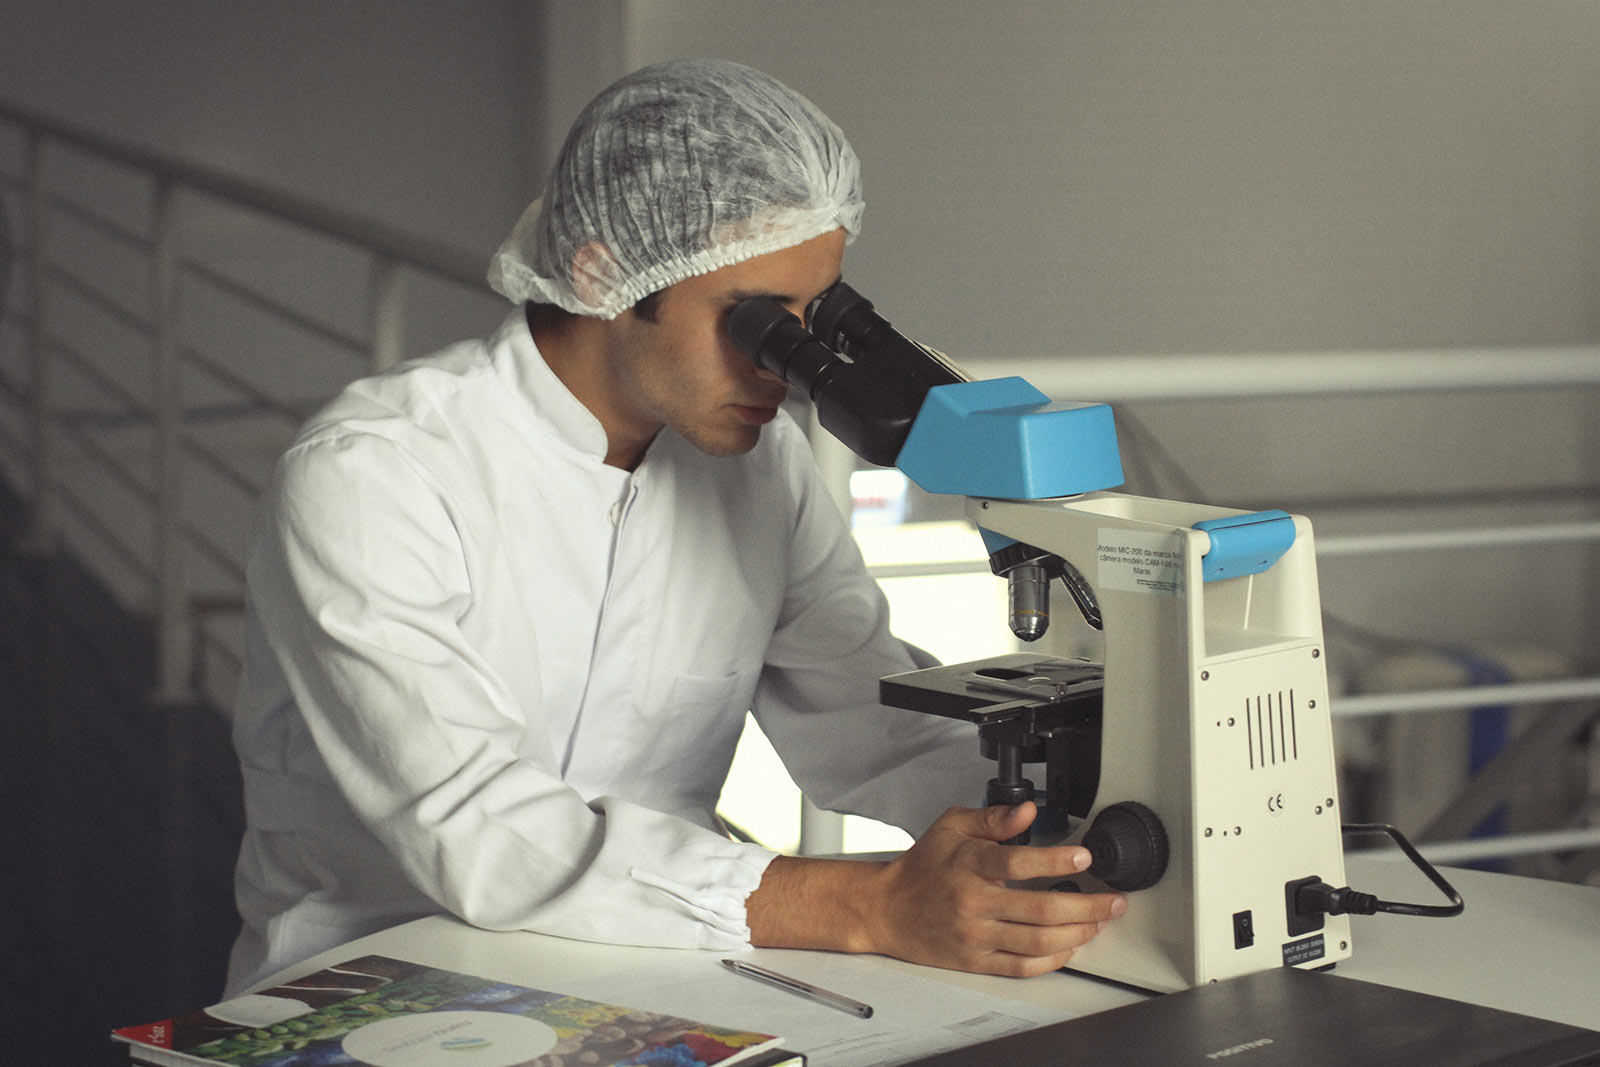 As part of functional testing a male lab technician looks through his microscope